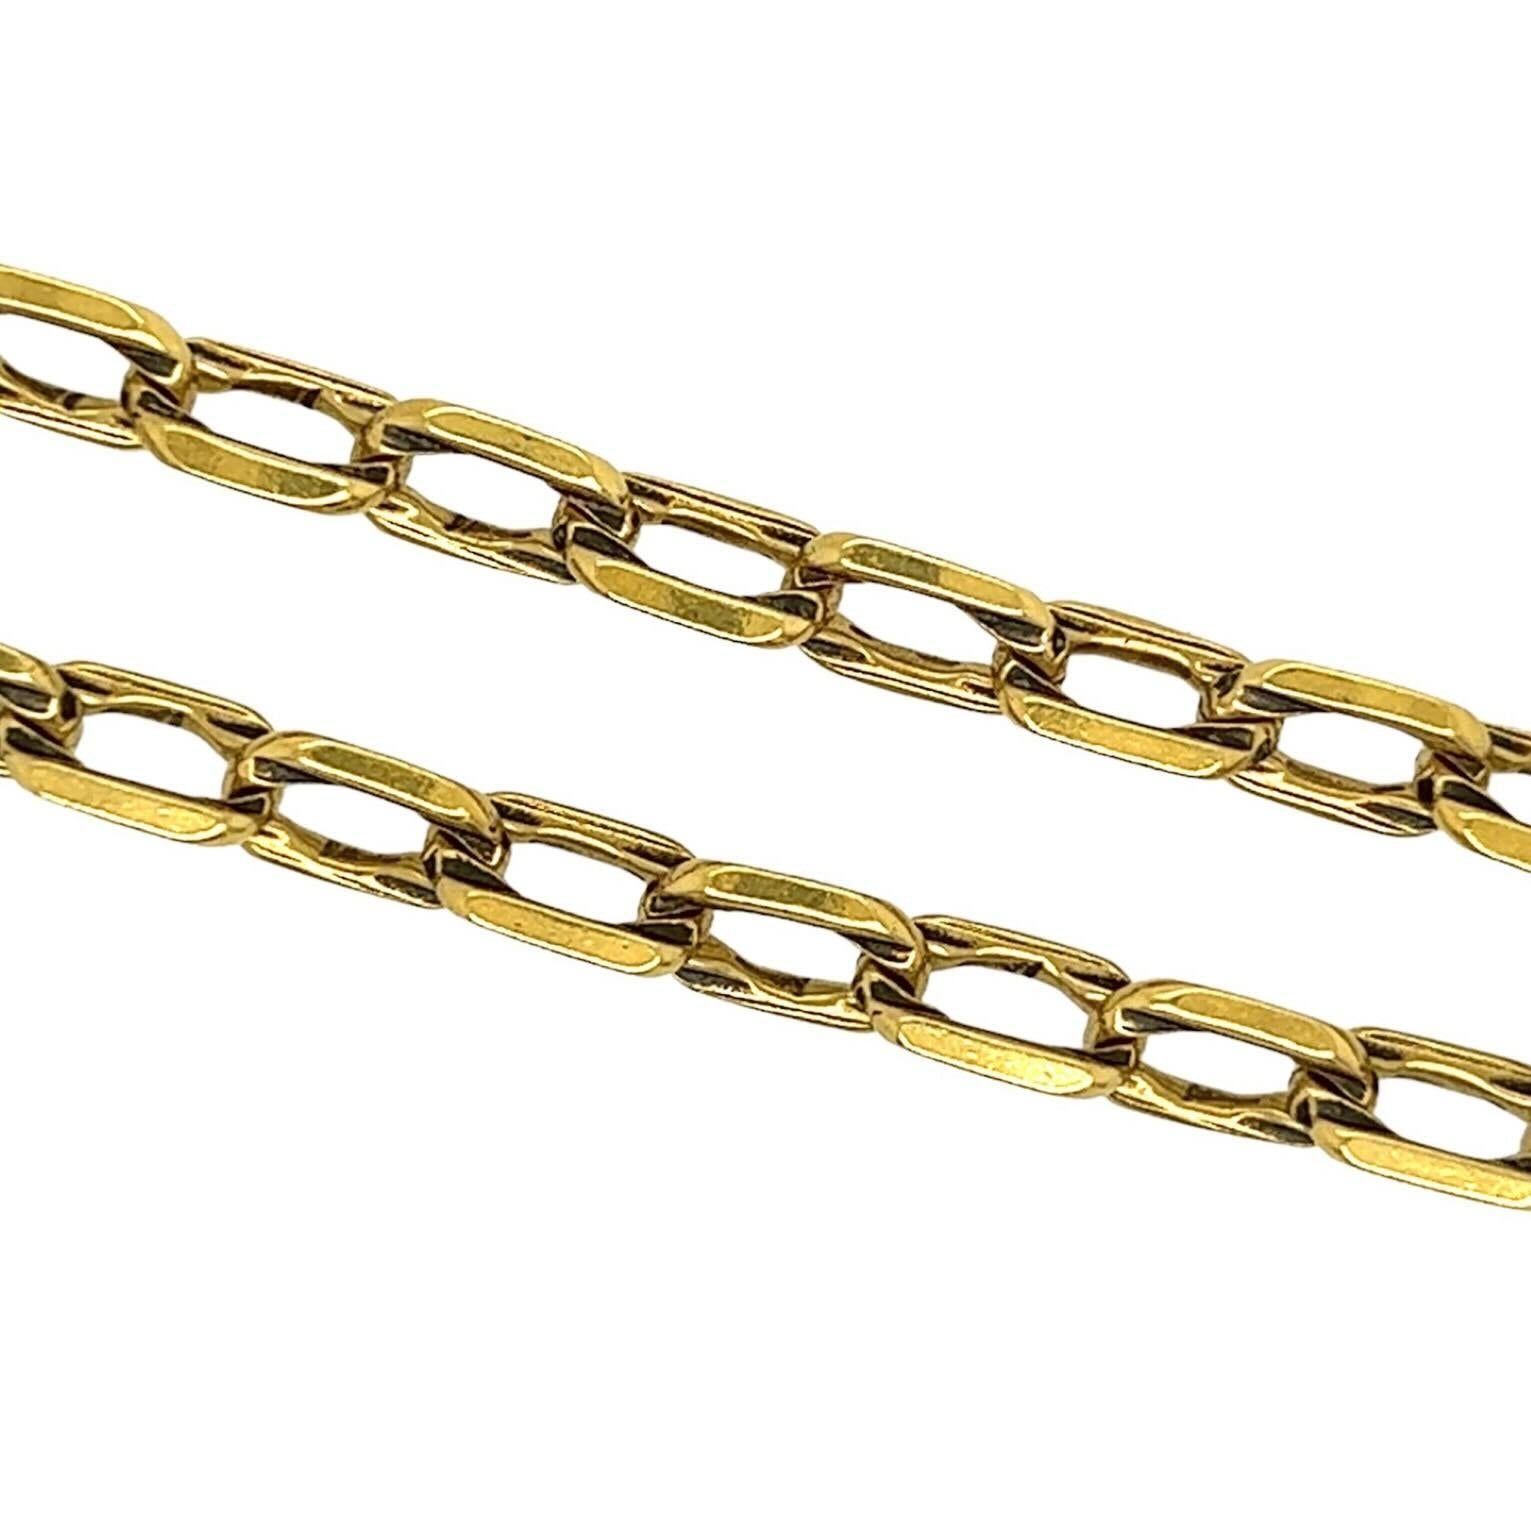 An 18 karat yellow gold necklace.  Designed as a long chain of beveled rounded rectangular links.  Length approximately 39 inches.  Gross weight approximately 59.80 grams.